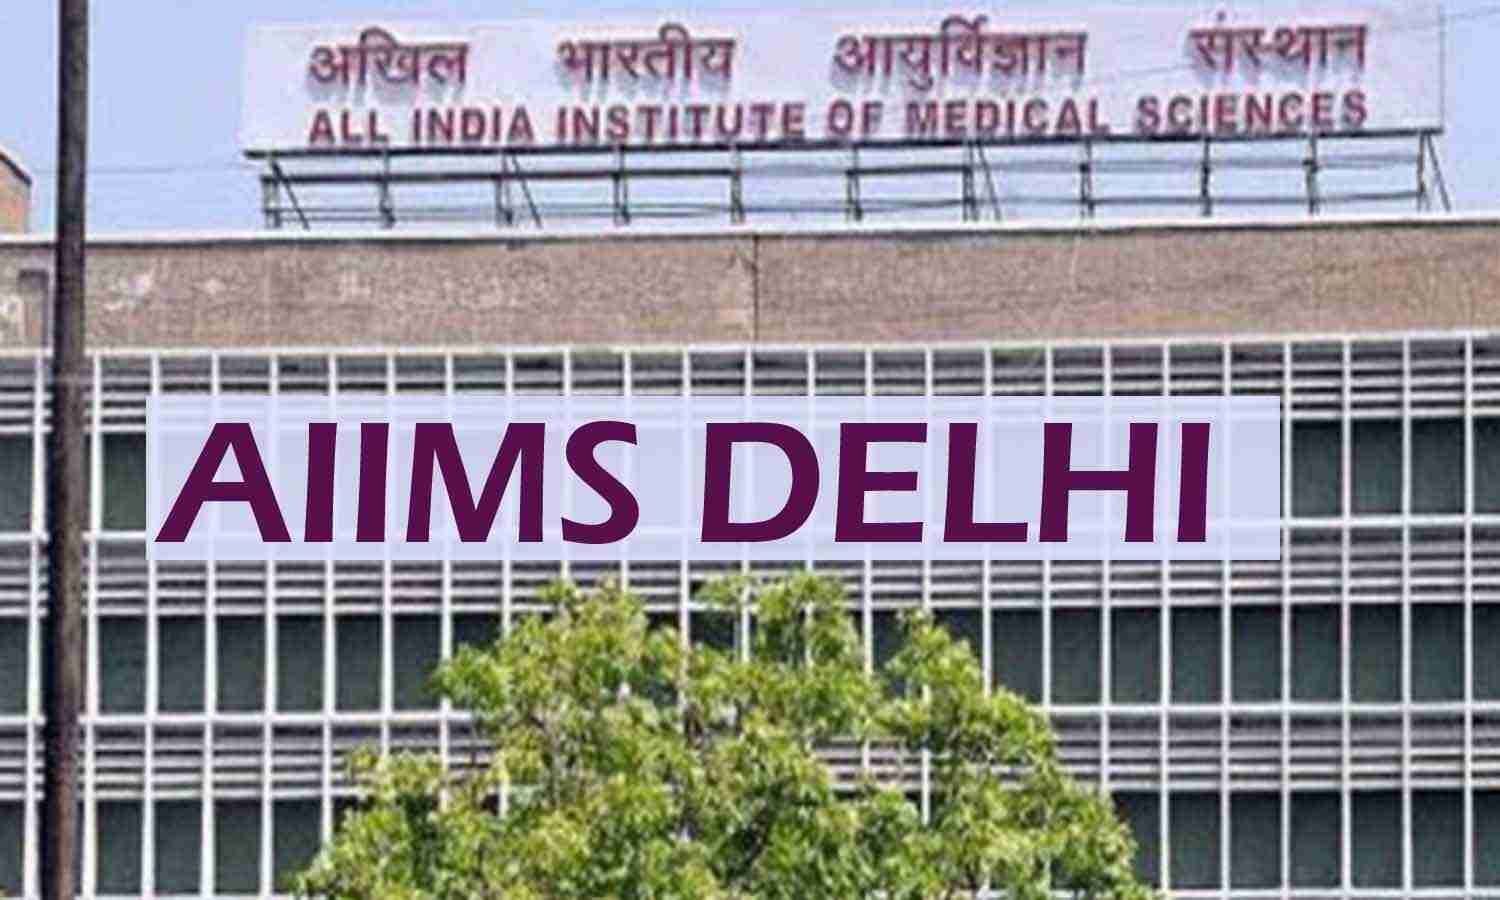 AIIMS Delhi redevelopment plan 2143 trees to be cut down, approval awaited